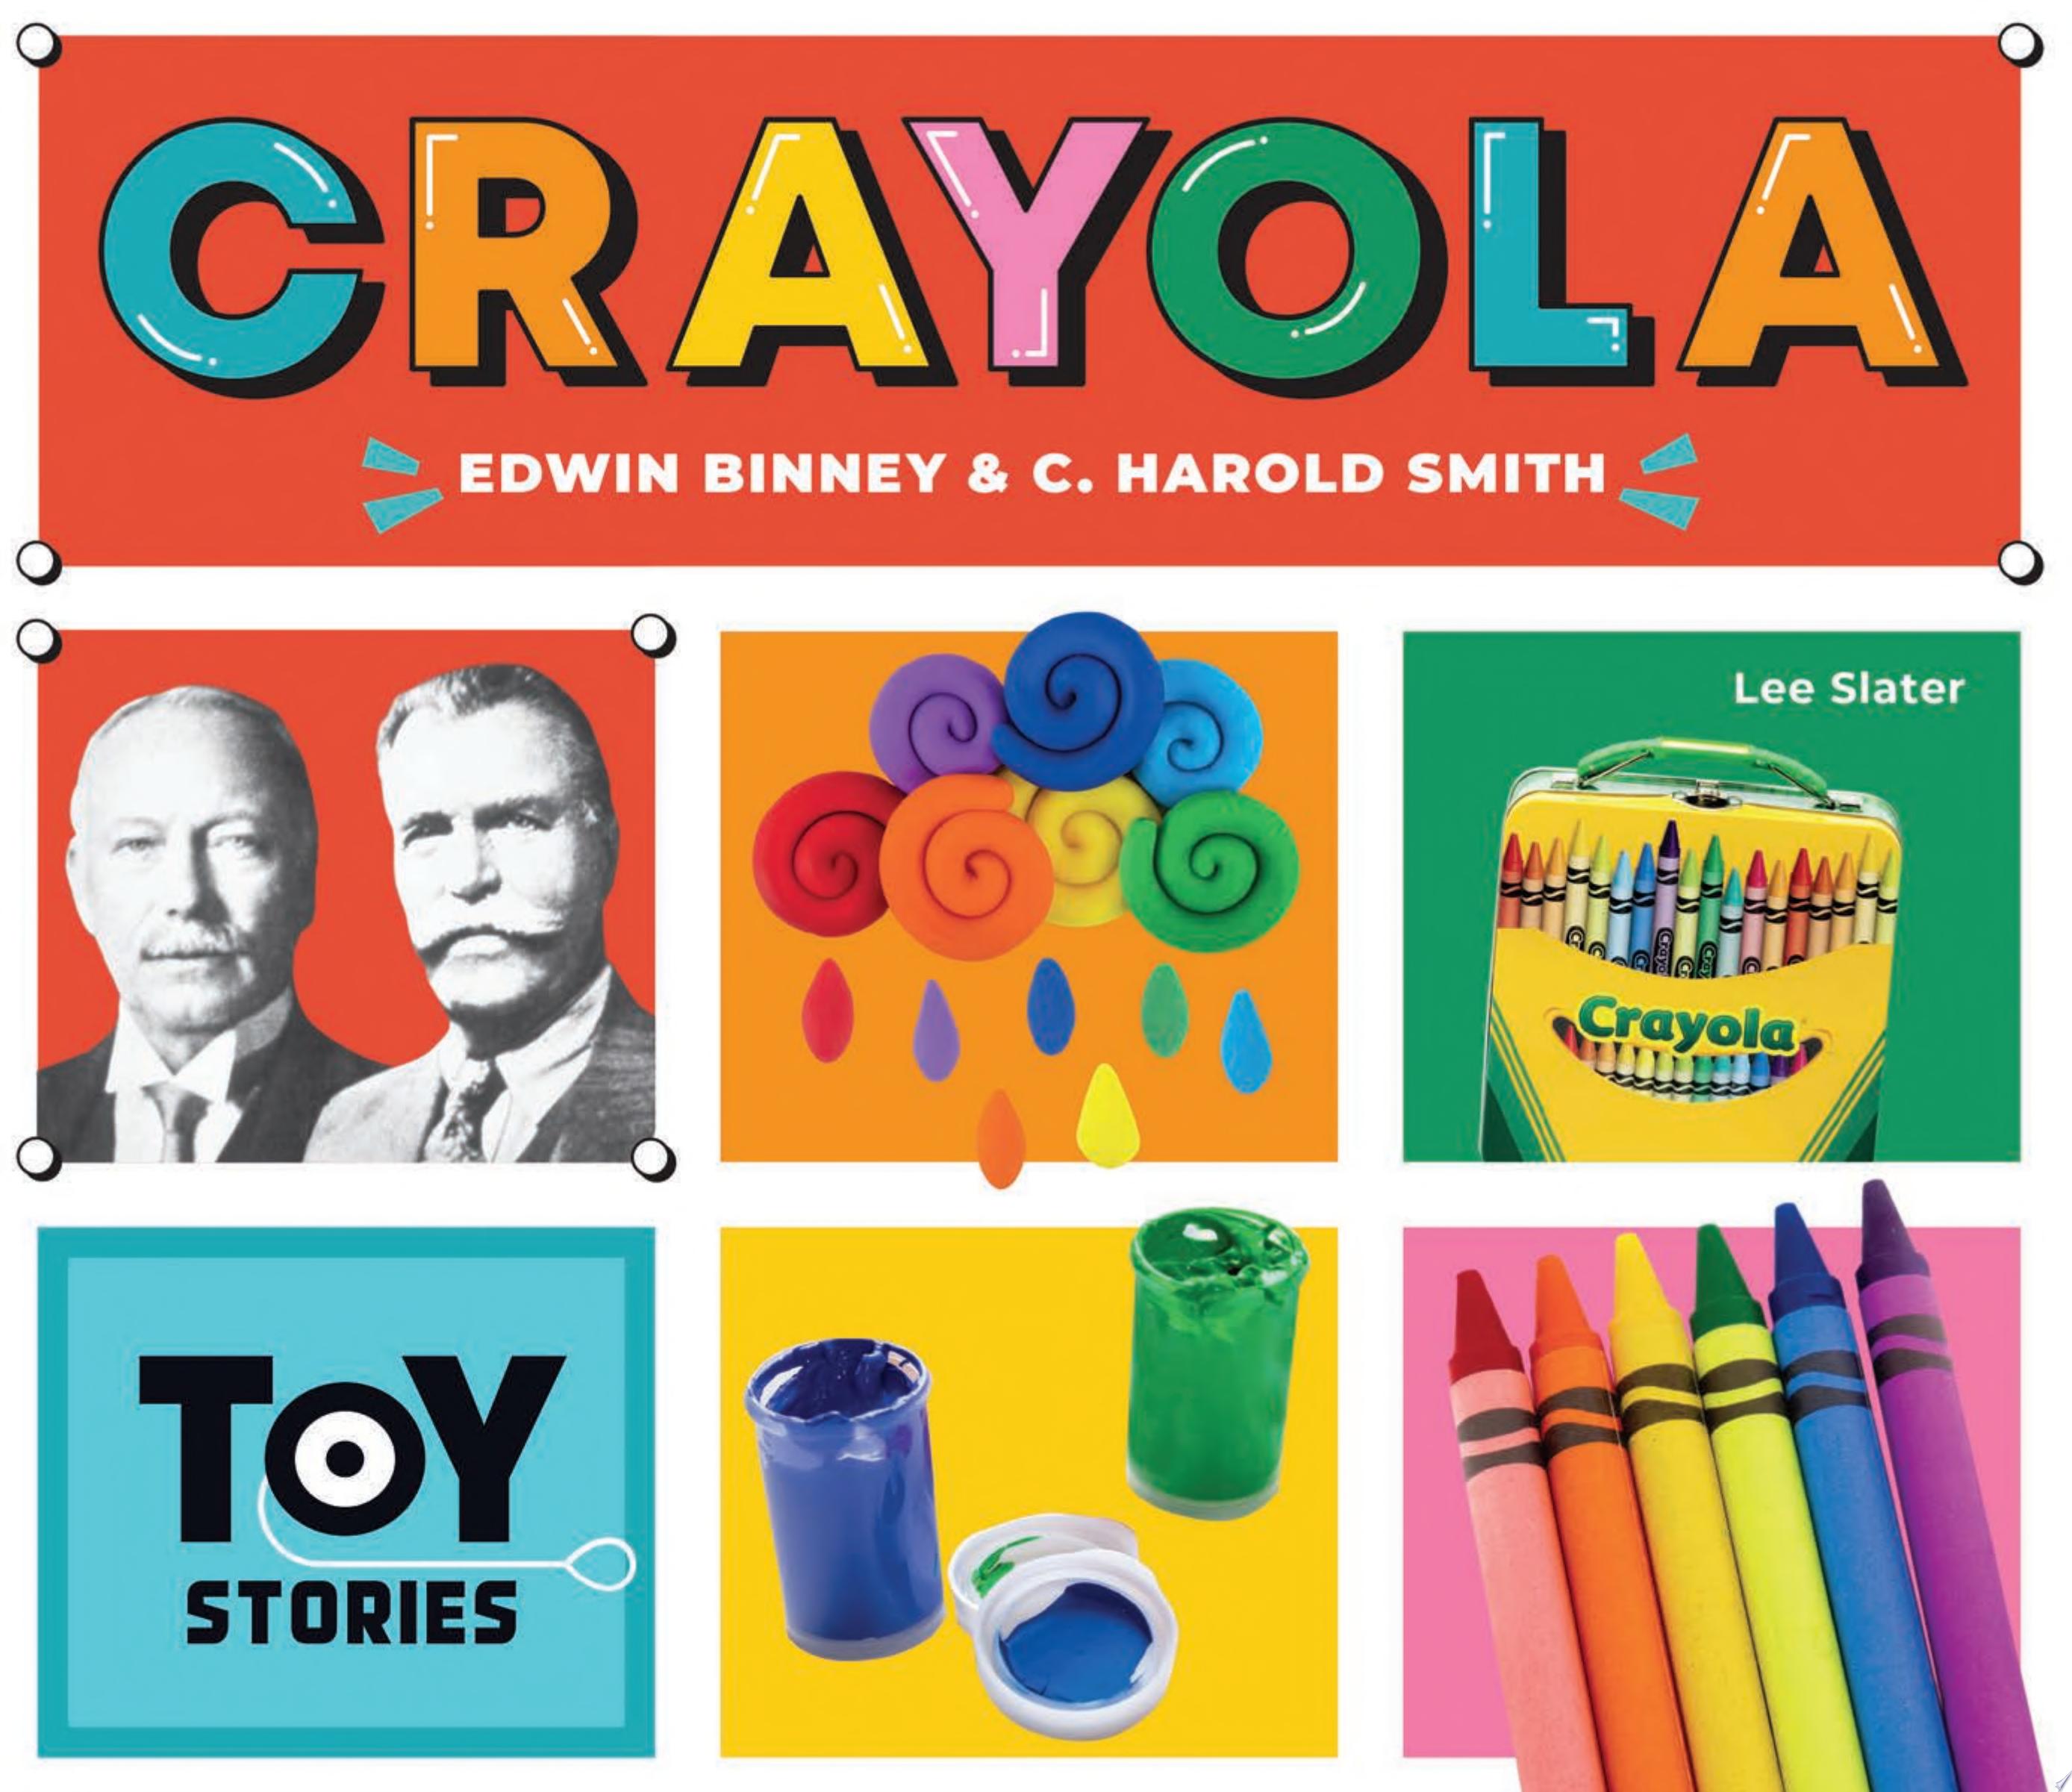 Image for "Crayola"